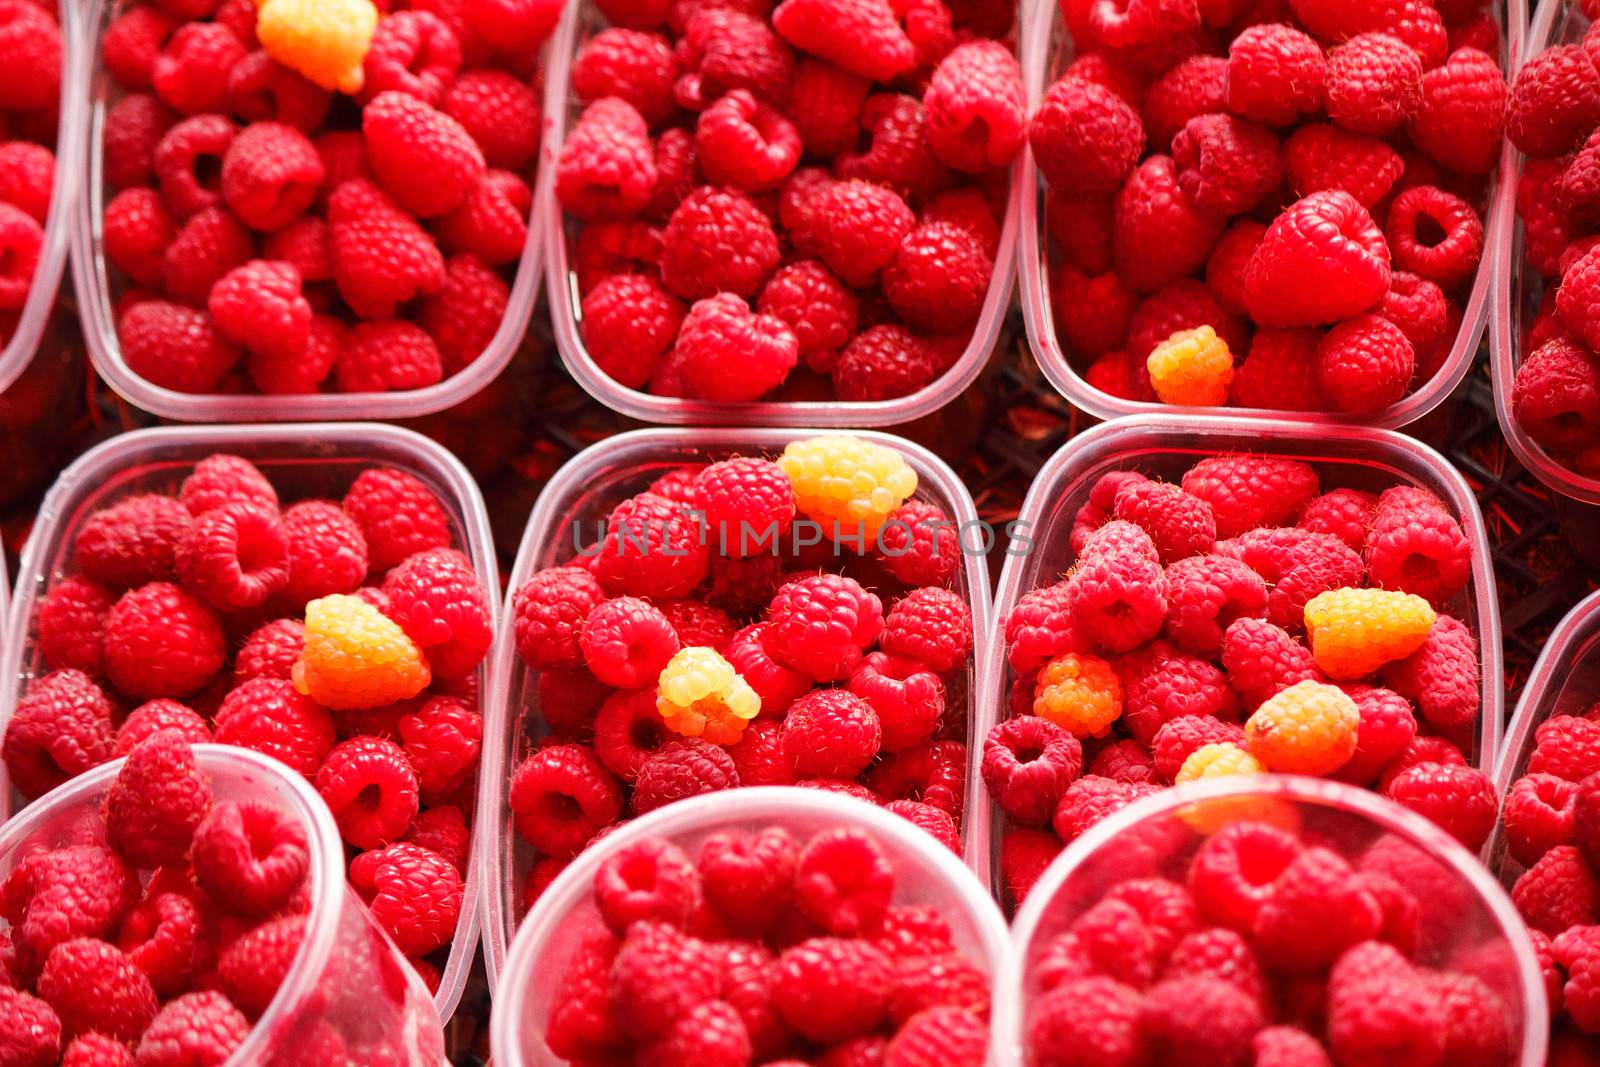 Ripe yellow and red raspberries in small containers for sale in the store.